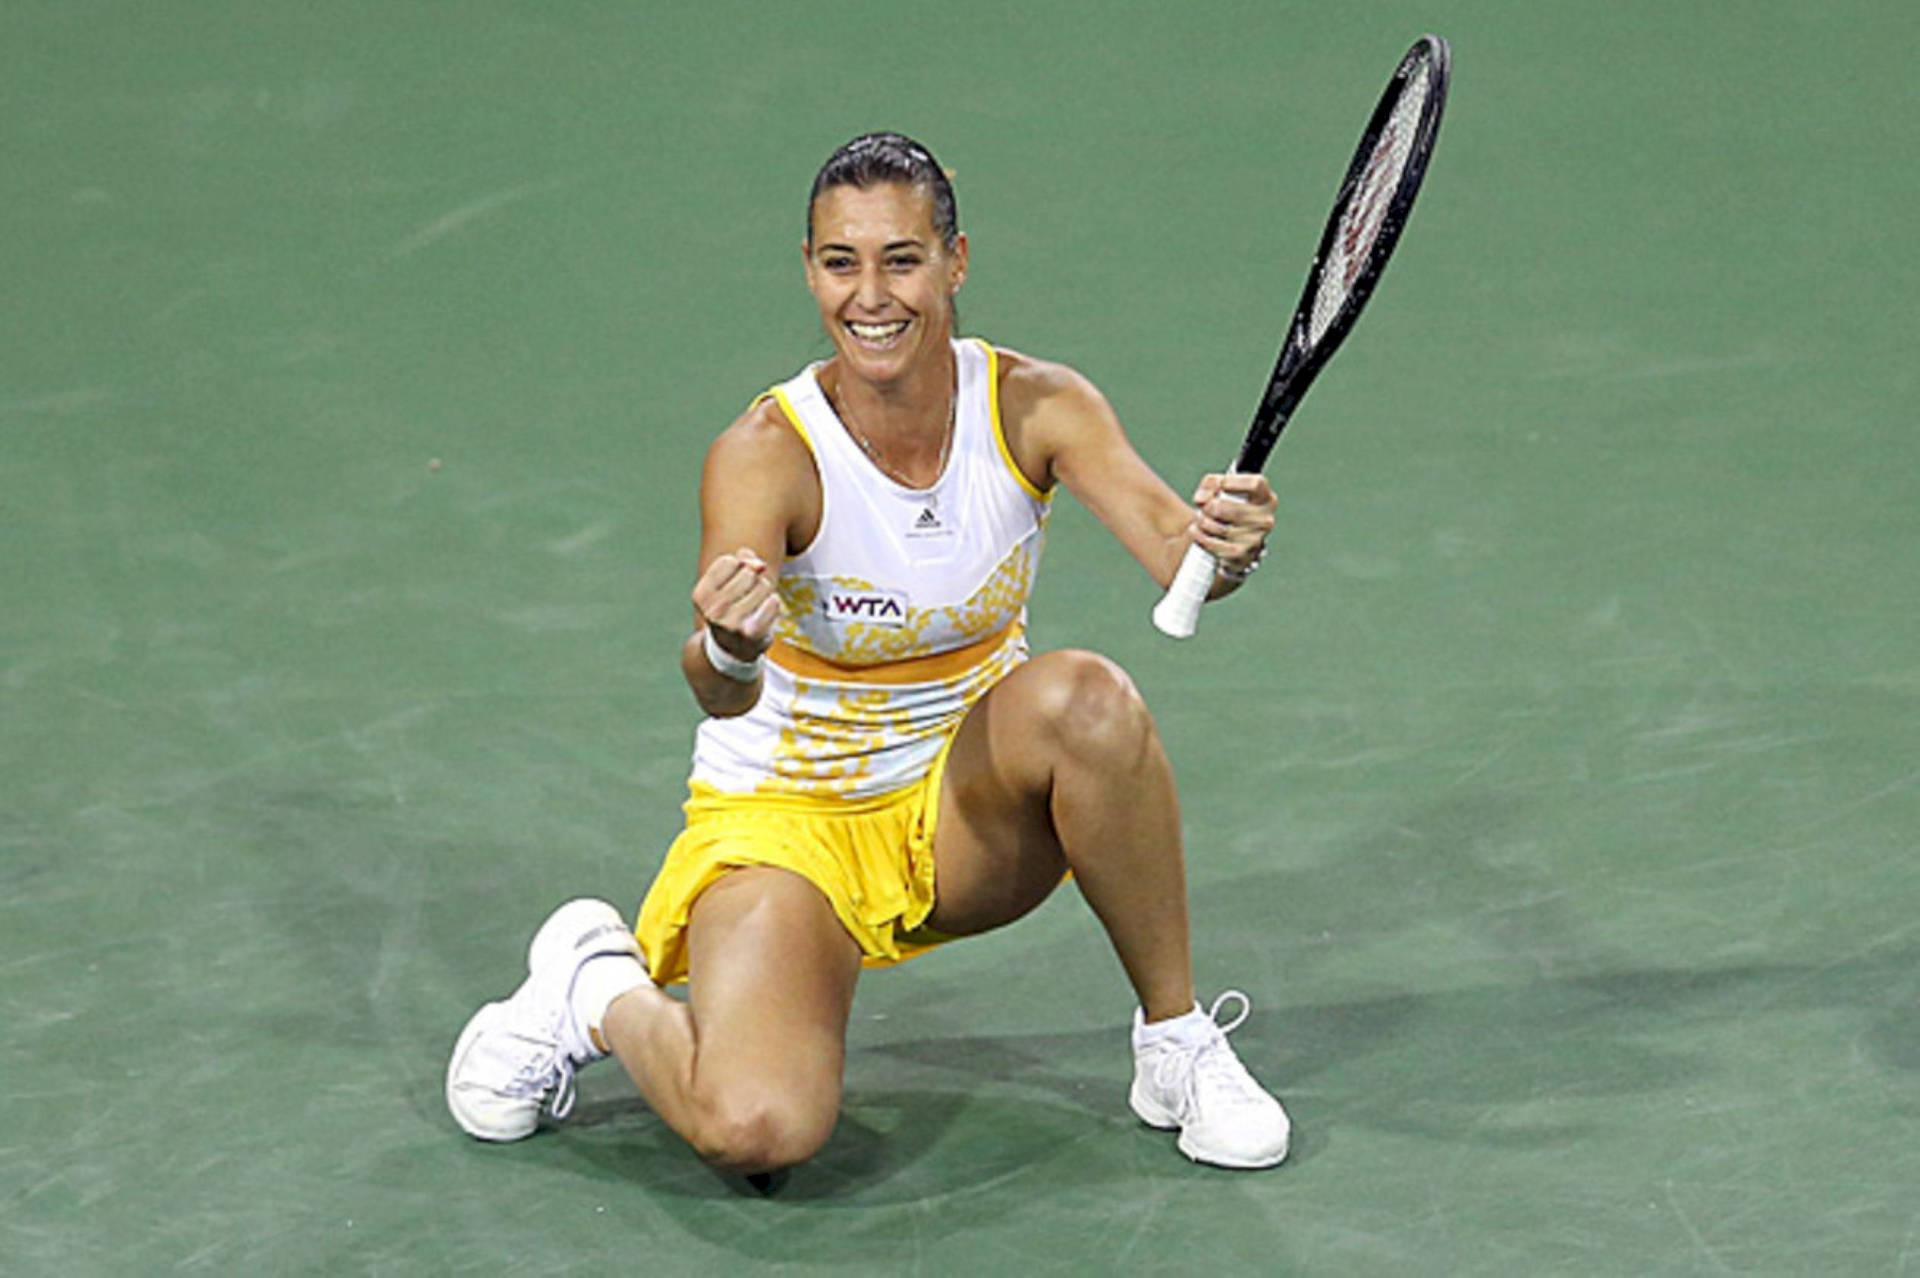 Flavia Pennetta in action on the tennis court Wallpaper